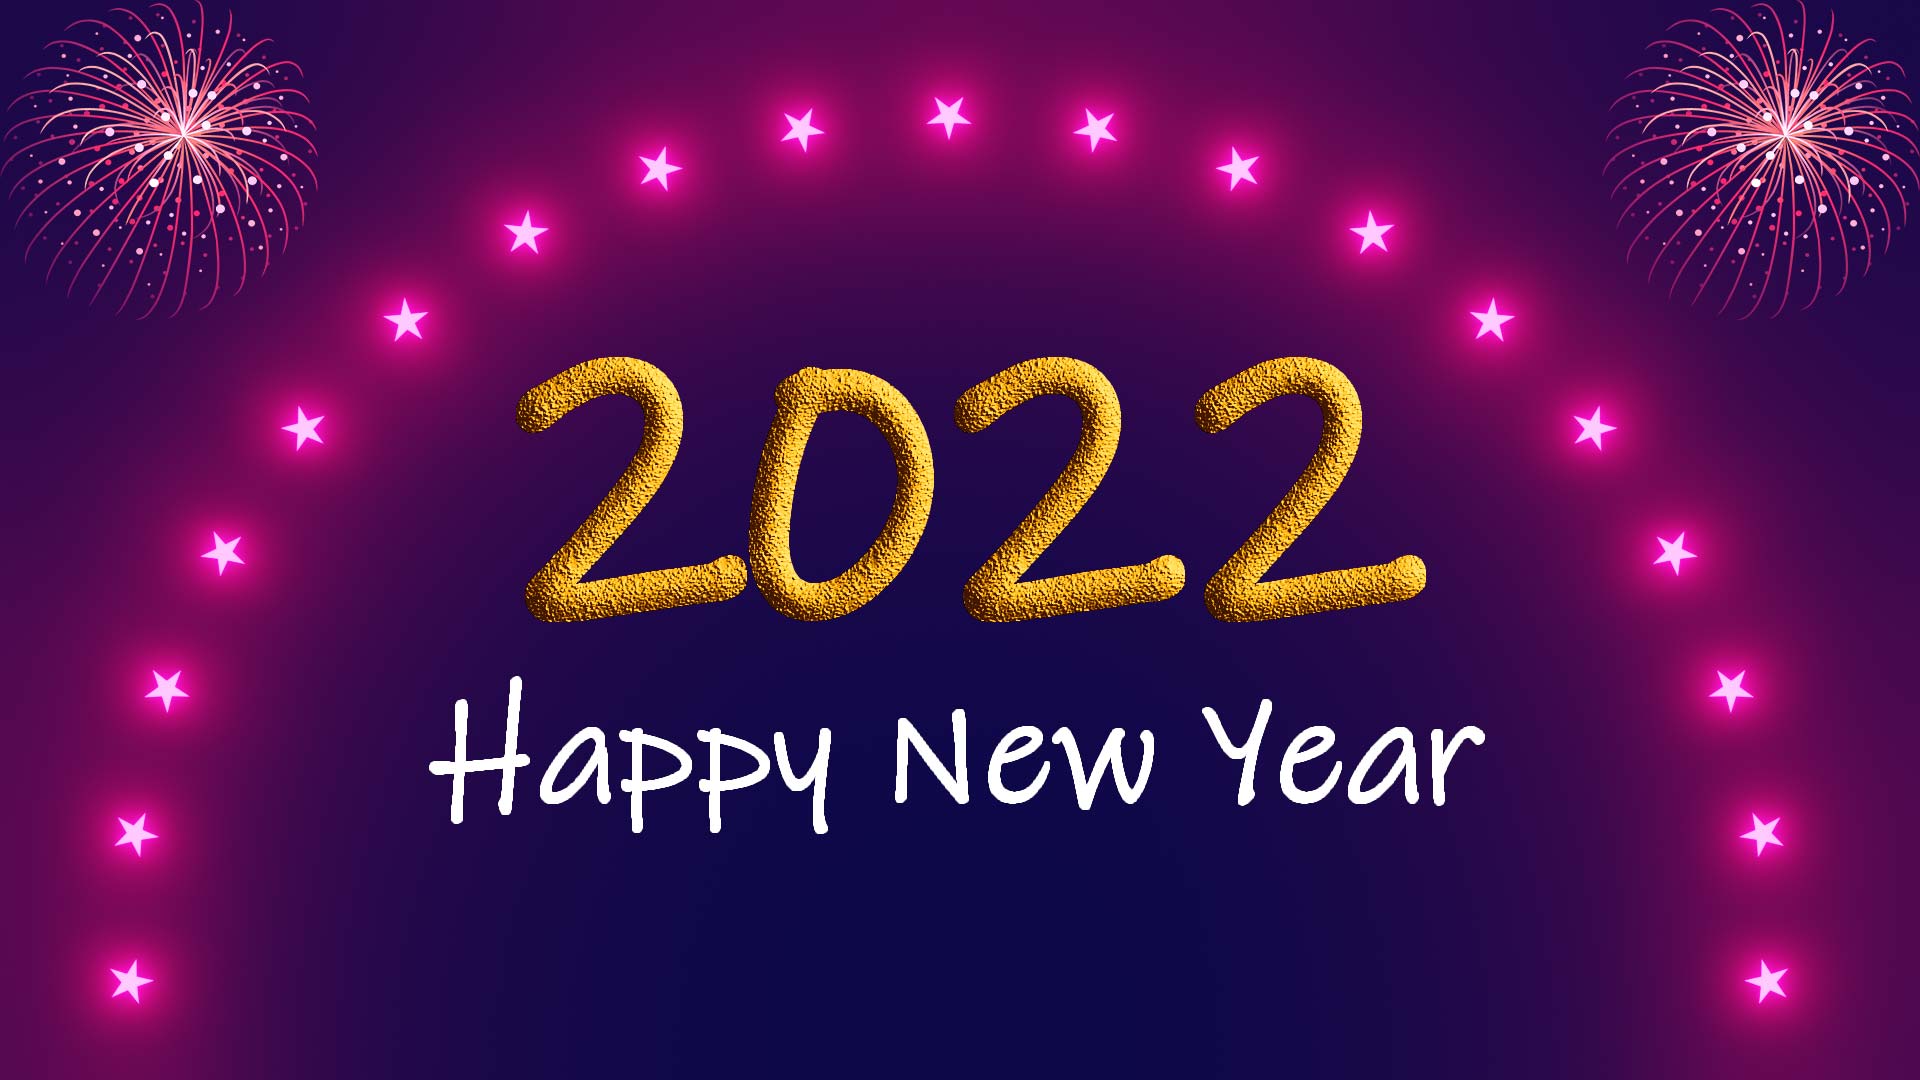 Happy New Year 2022 Photo Free Download